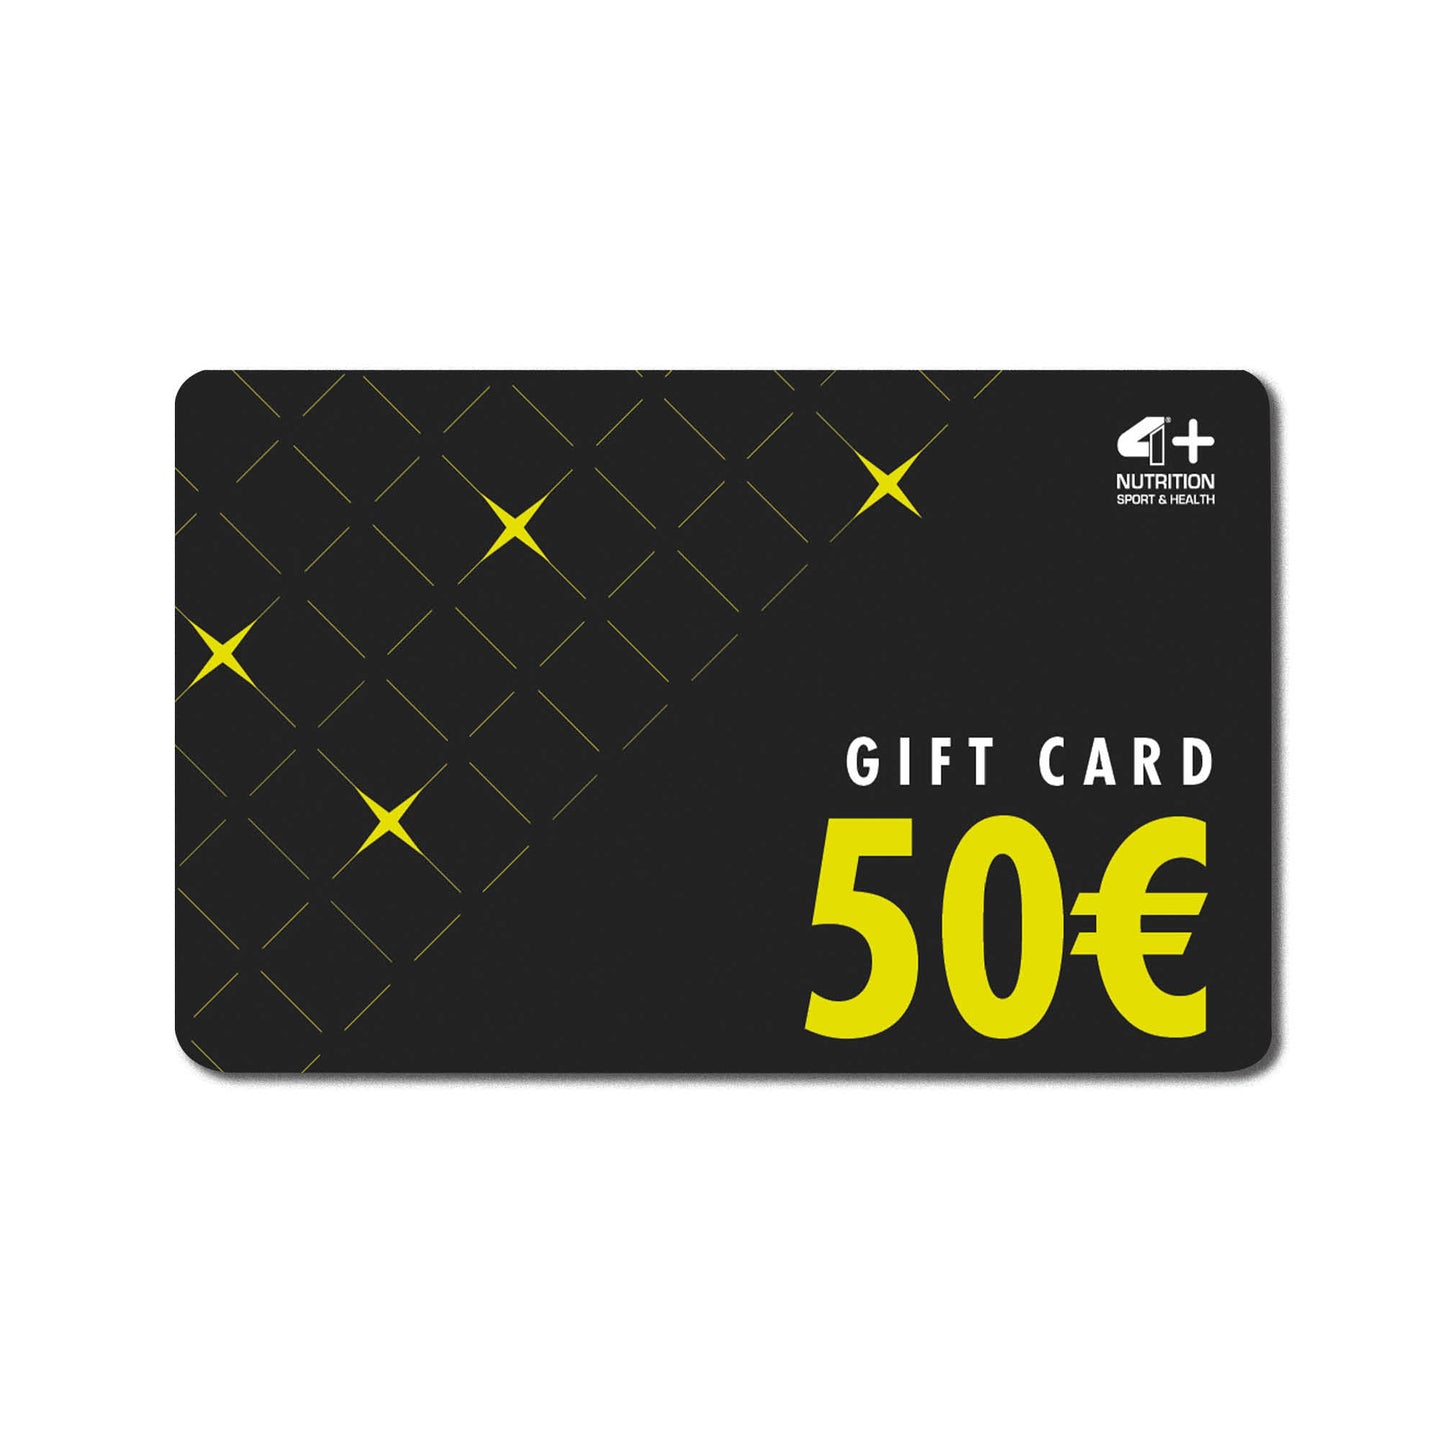 4+ Nutrition Gift Card